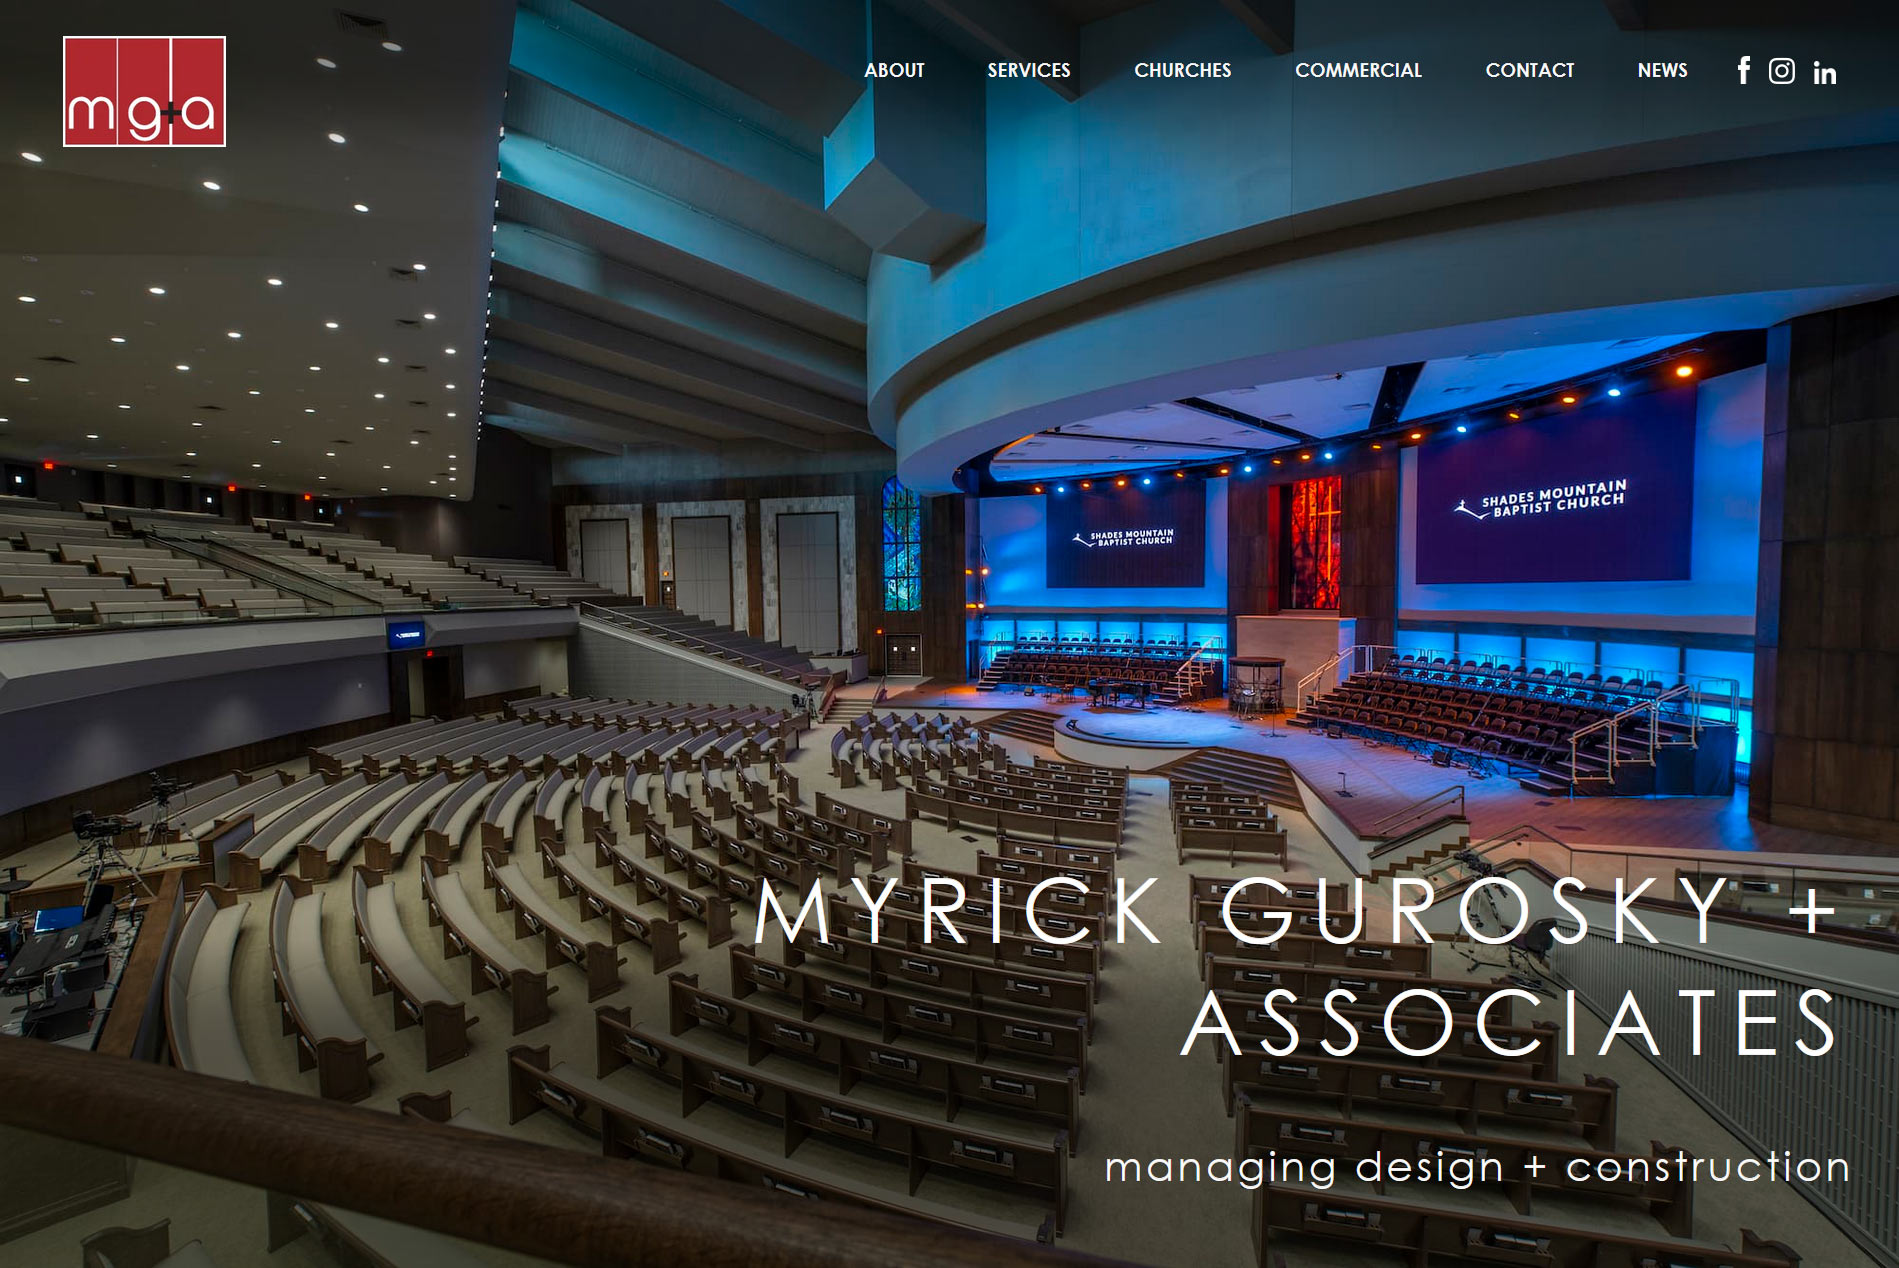 MG+A Launches Redesigned Website